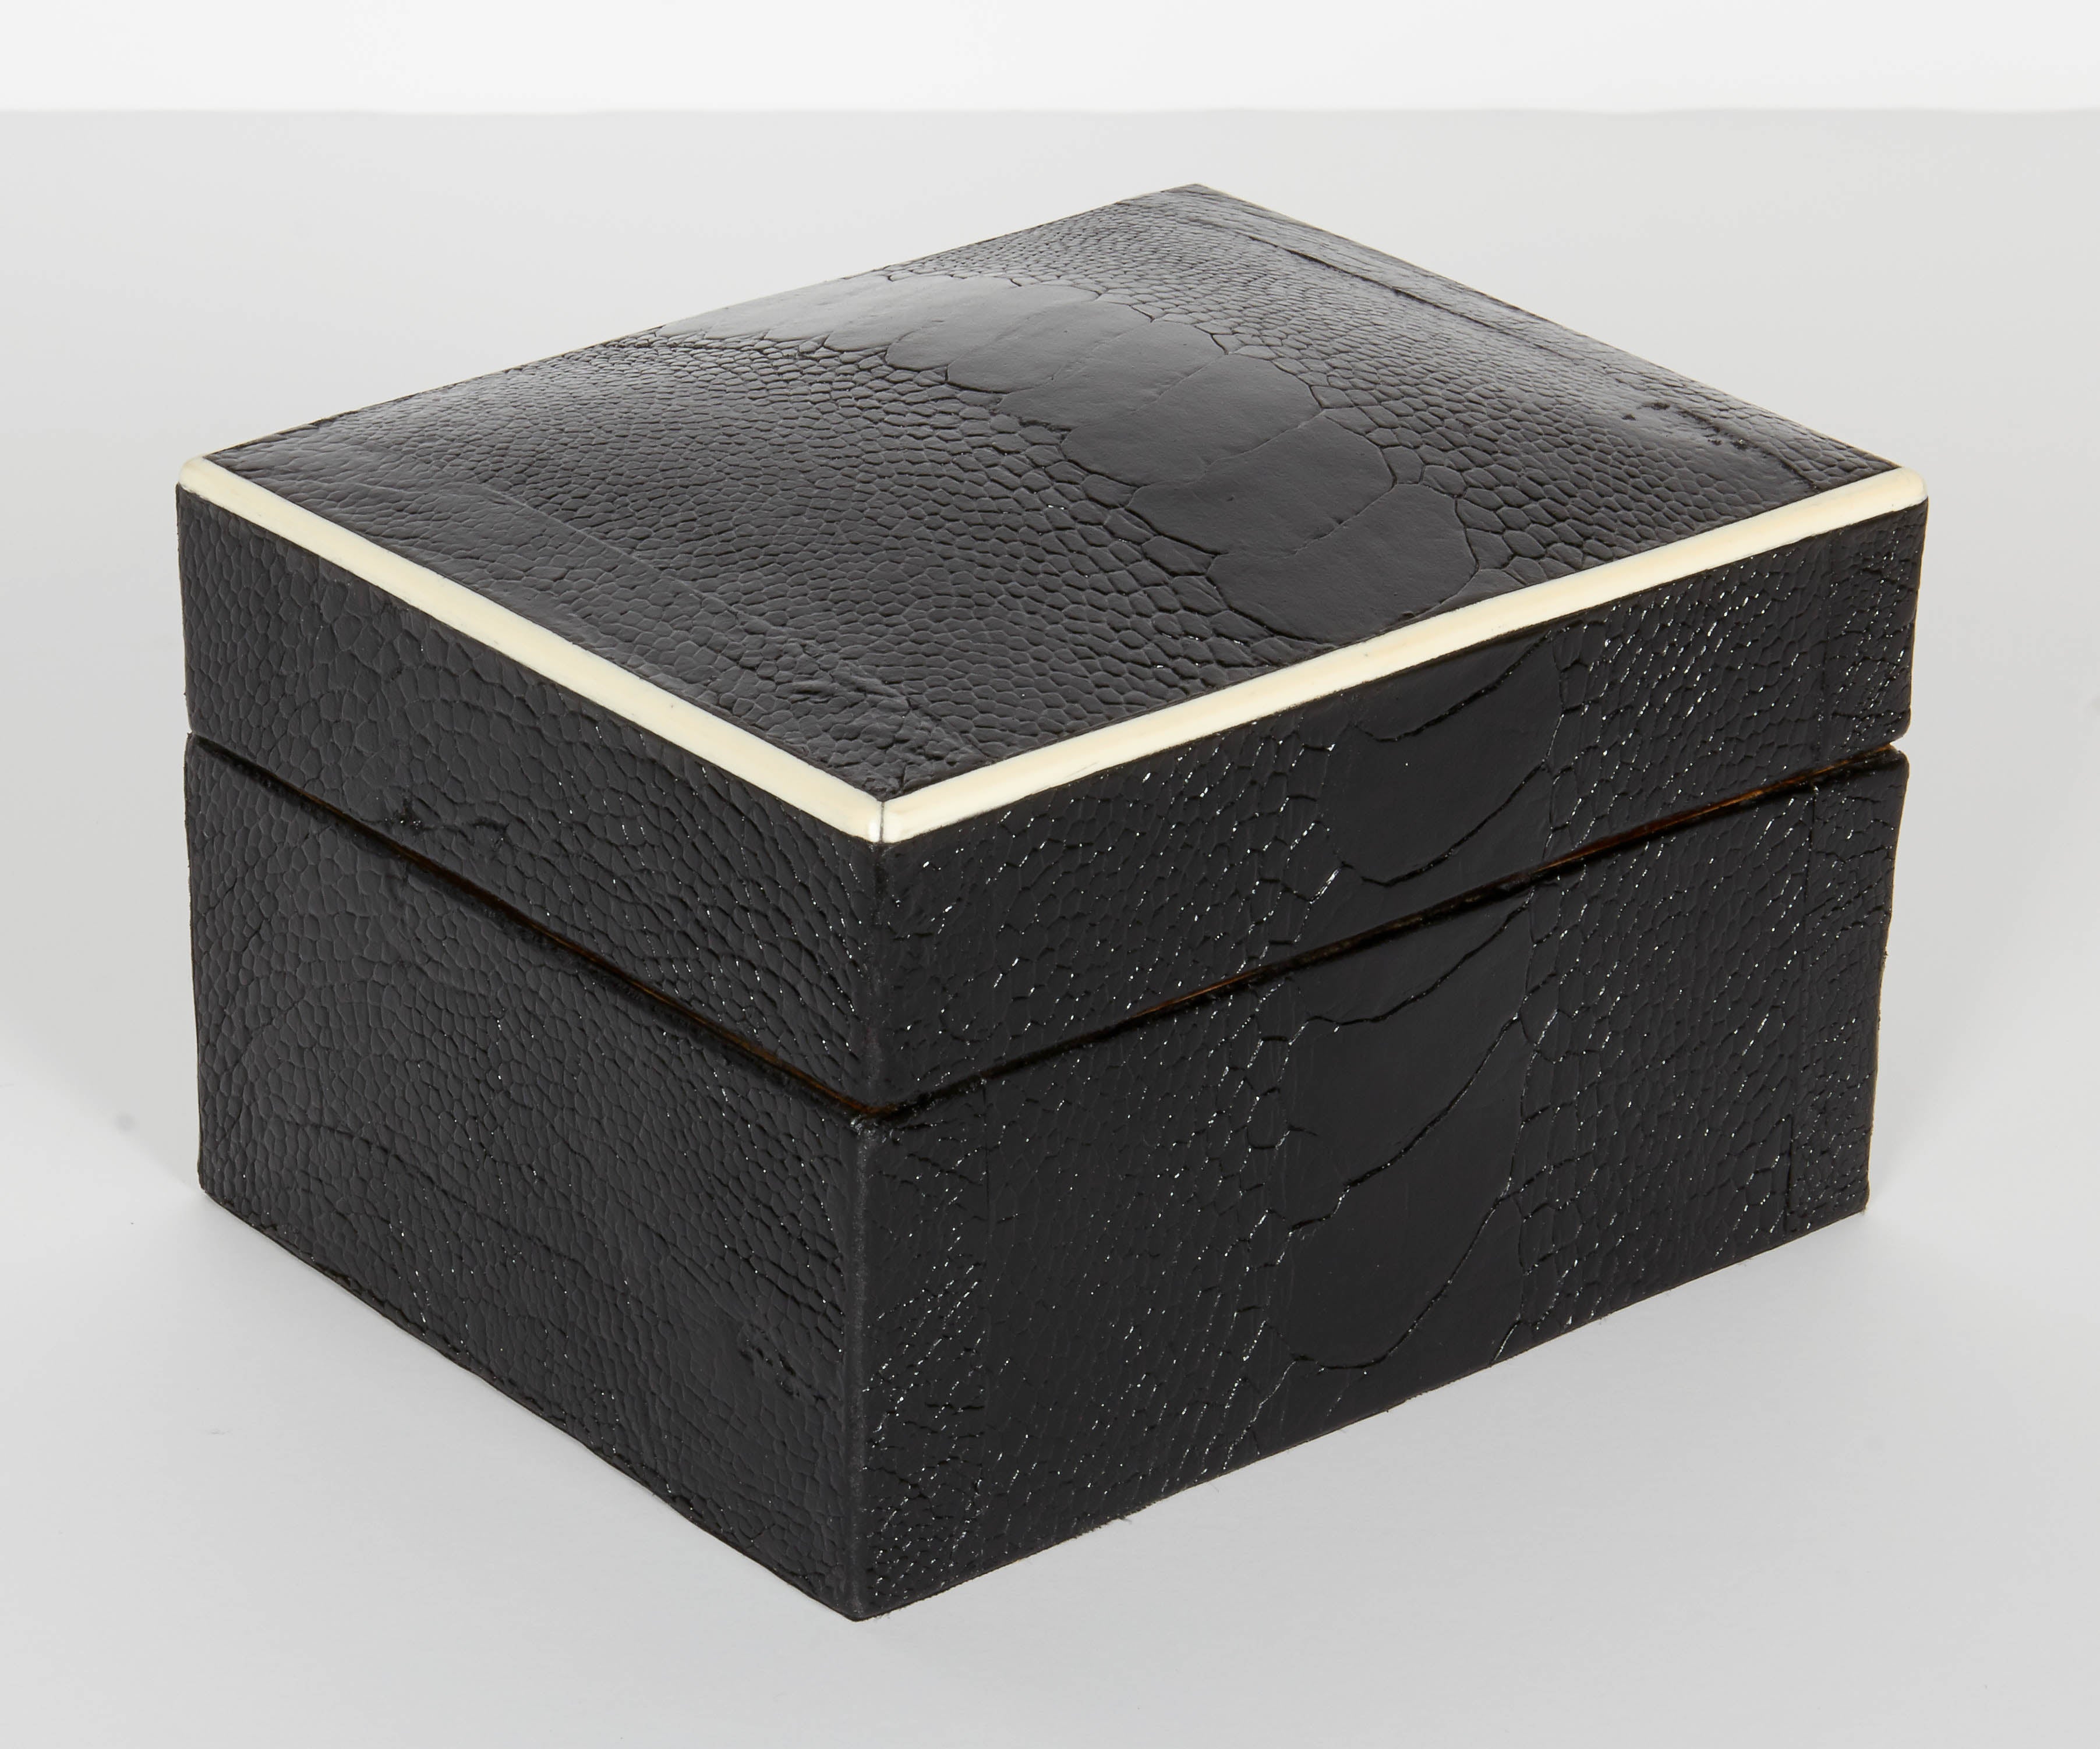 French Pair of Exotic Ostrich Leather Decorative Boxes with Bone Inlay ‘Black/Espresso’